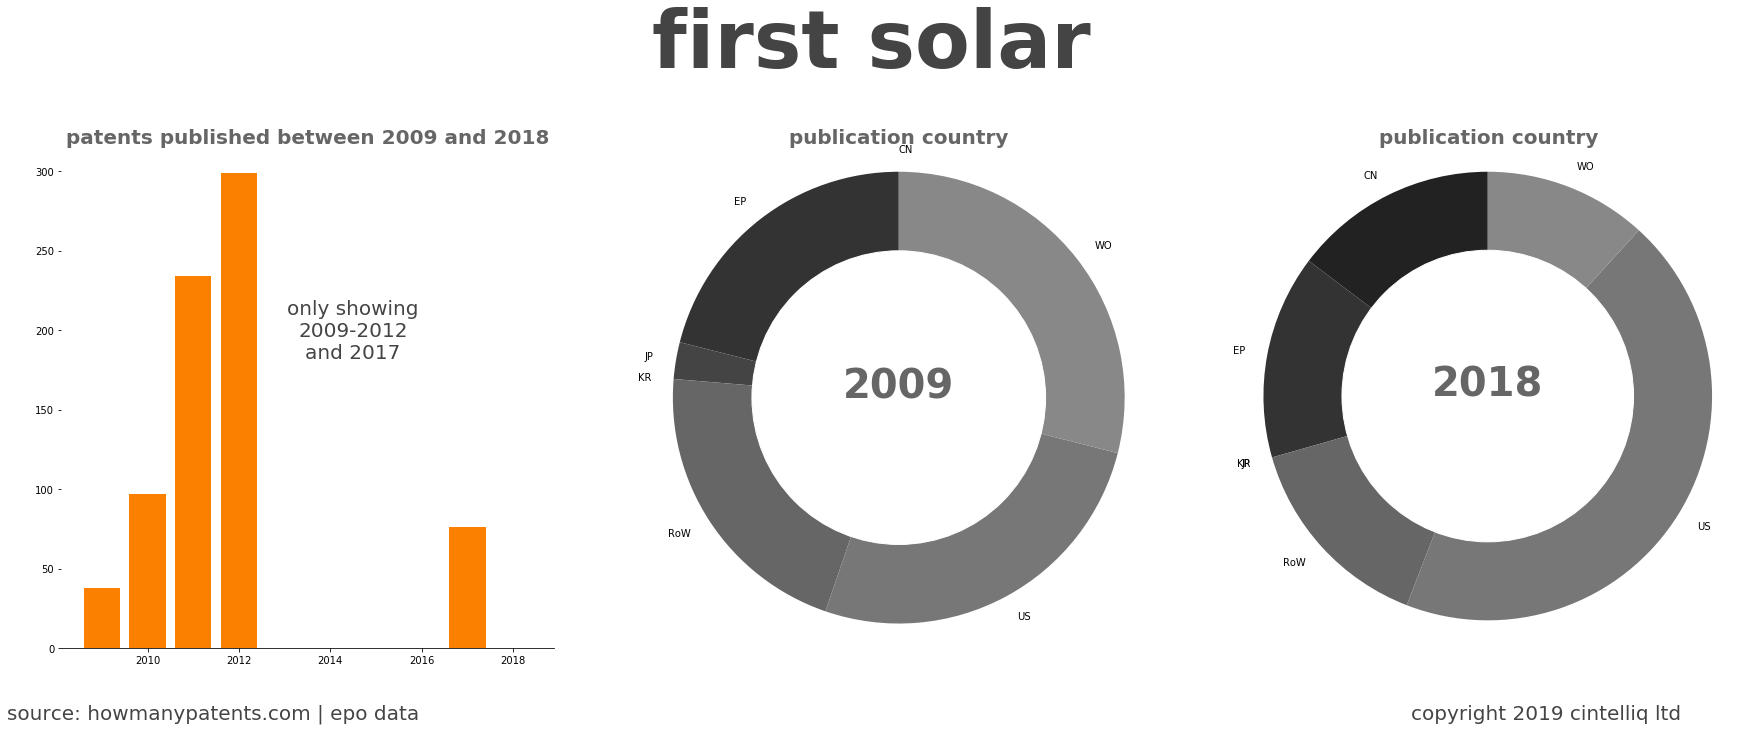 summary of patents for First Solar